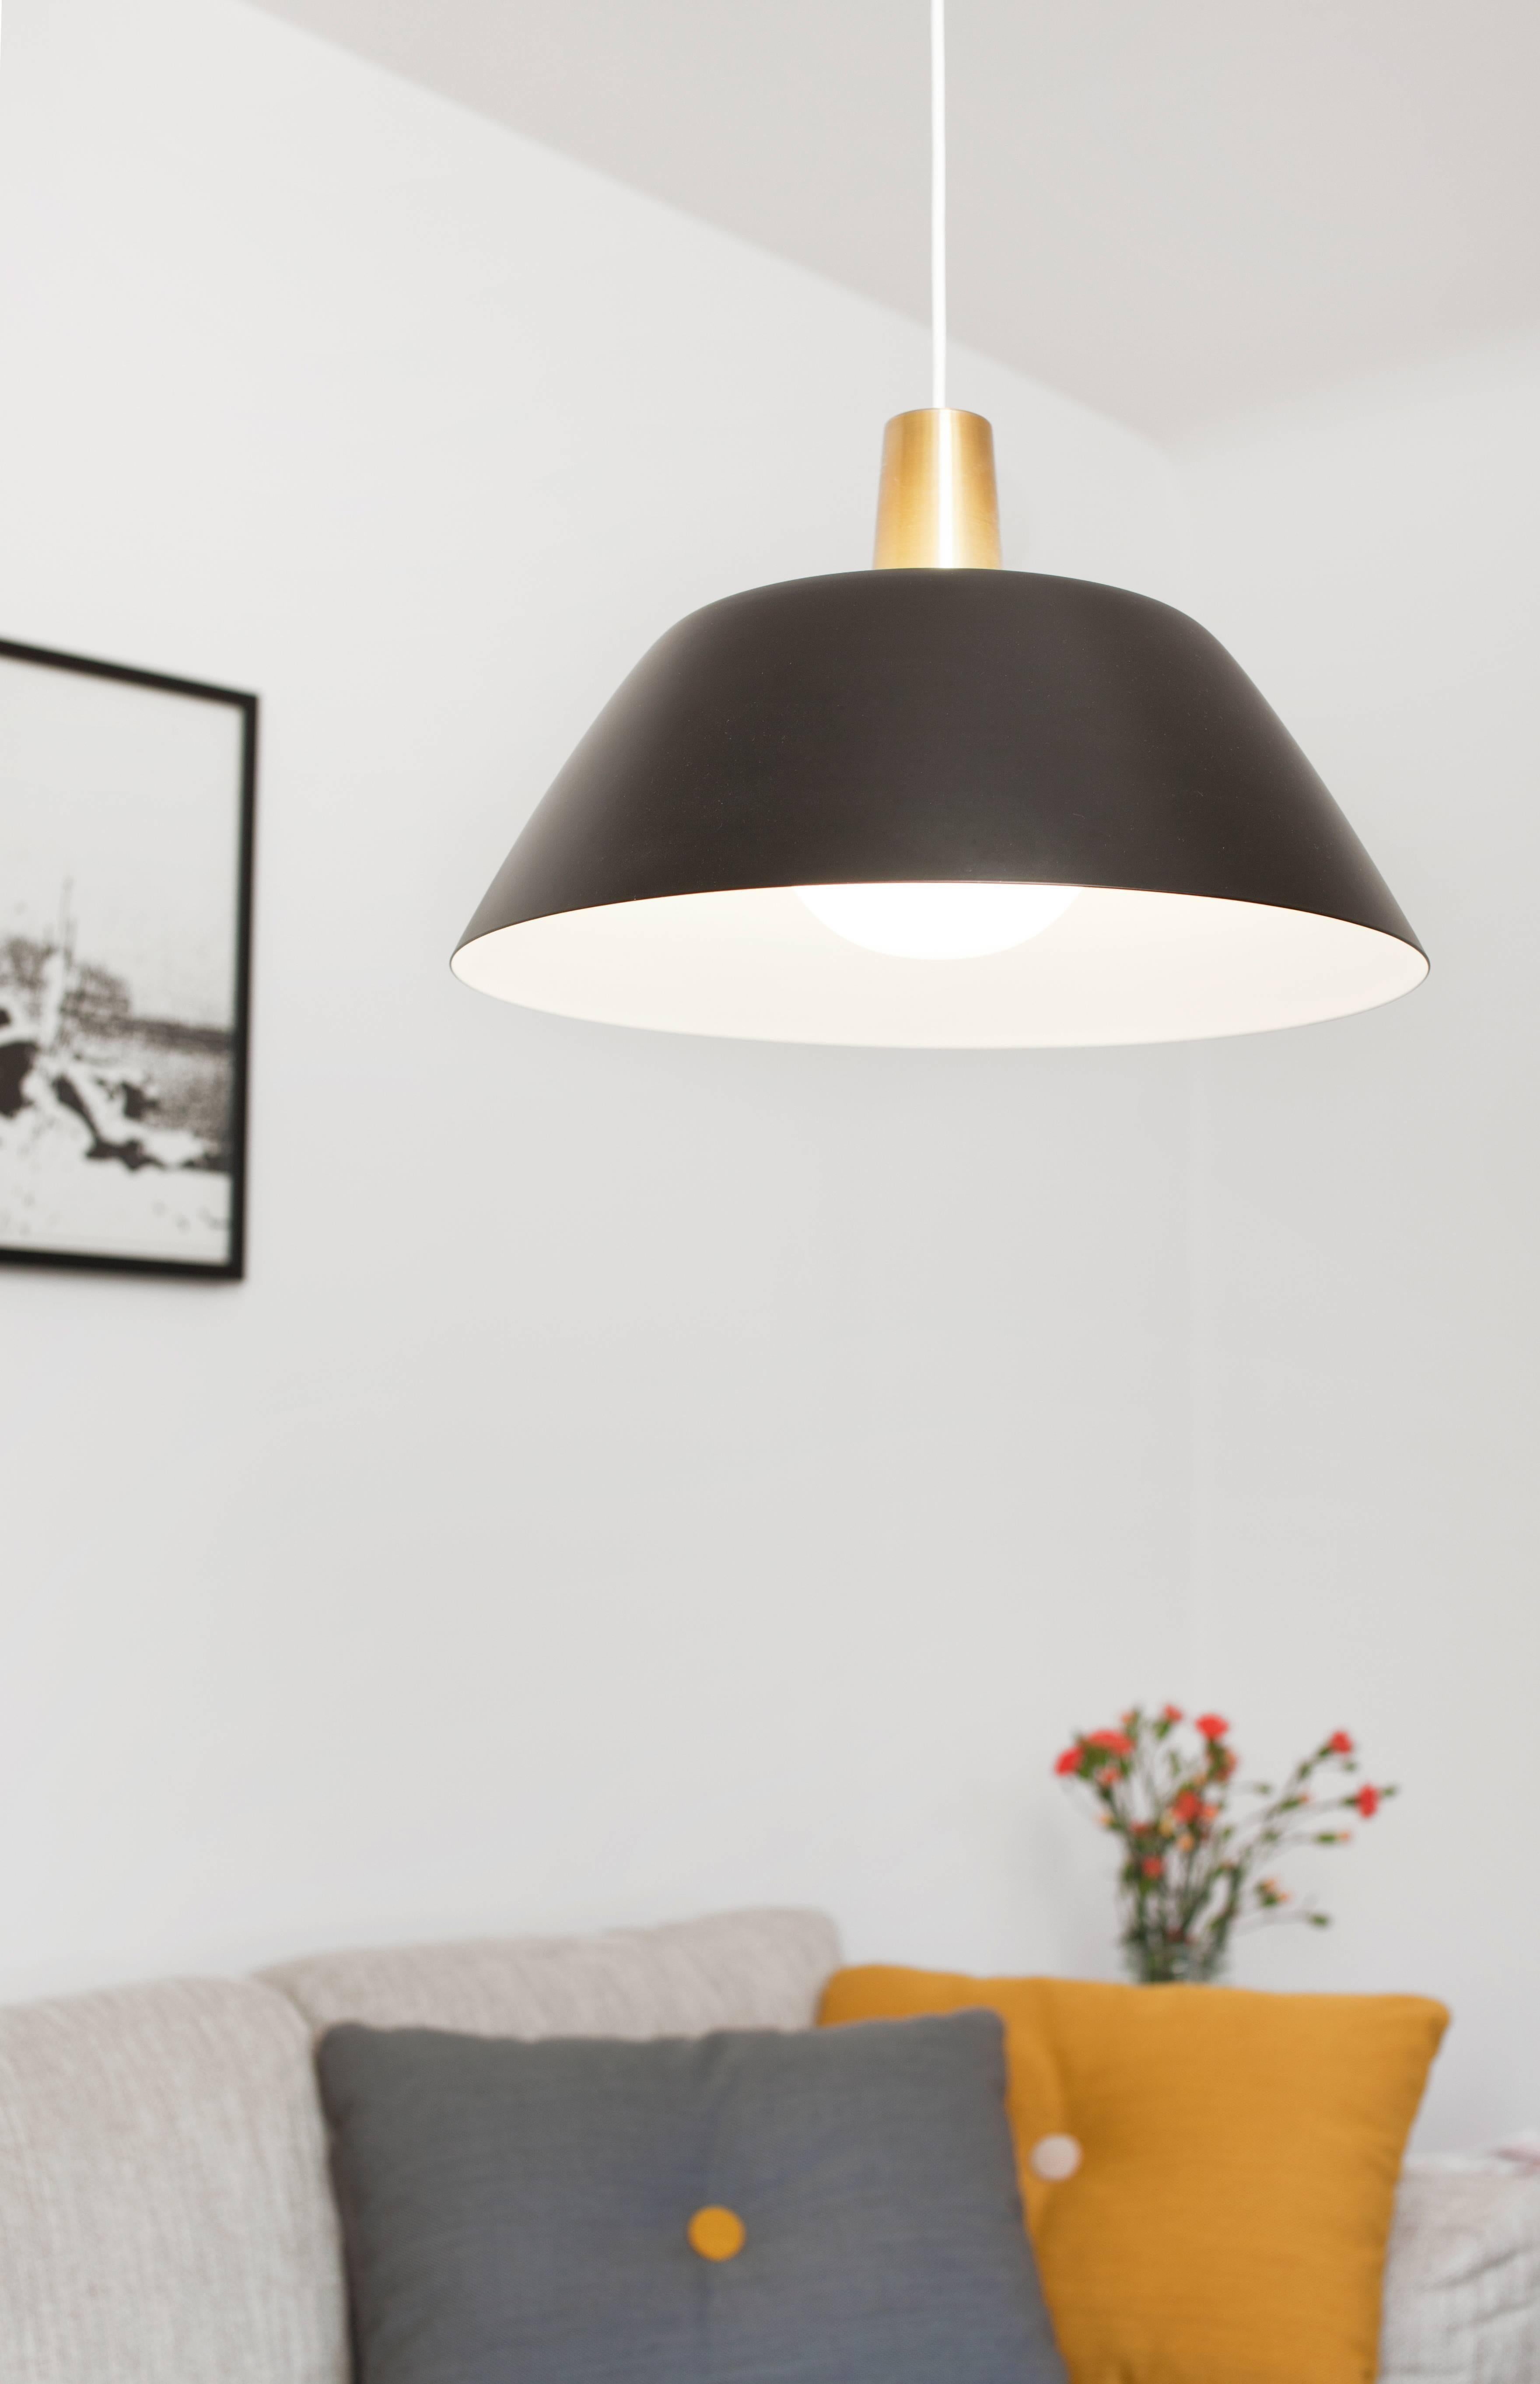 Pair of Lisa Johansson-Pape 'Ihanne' Pendant Lamps for Innolux Oy in Black

Originally designed in 1956, these authorized re-editions are true to the refined simplicity and detail of Pape's iconic original. The white interior of each metallic shade